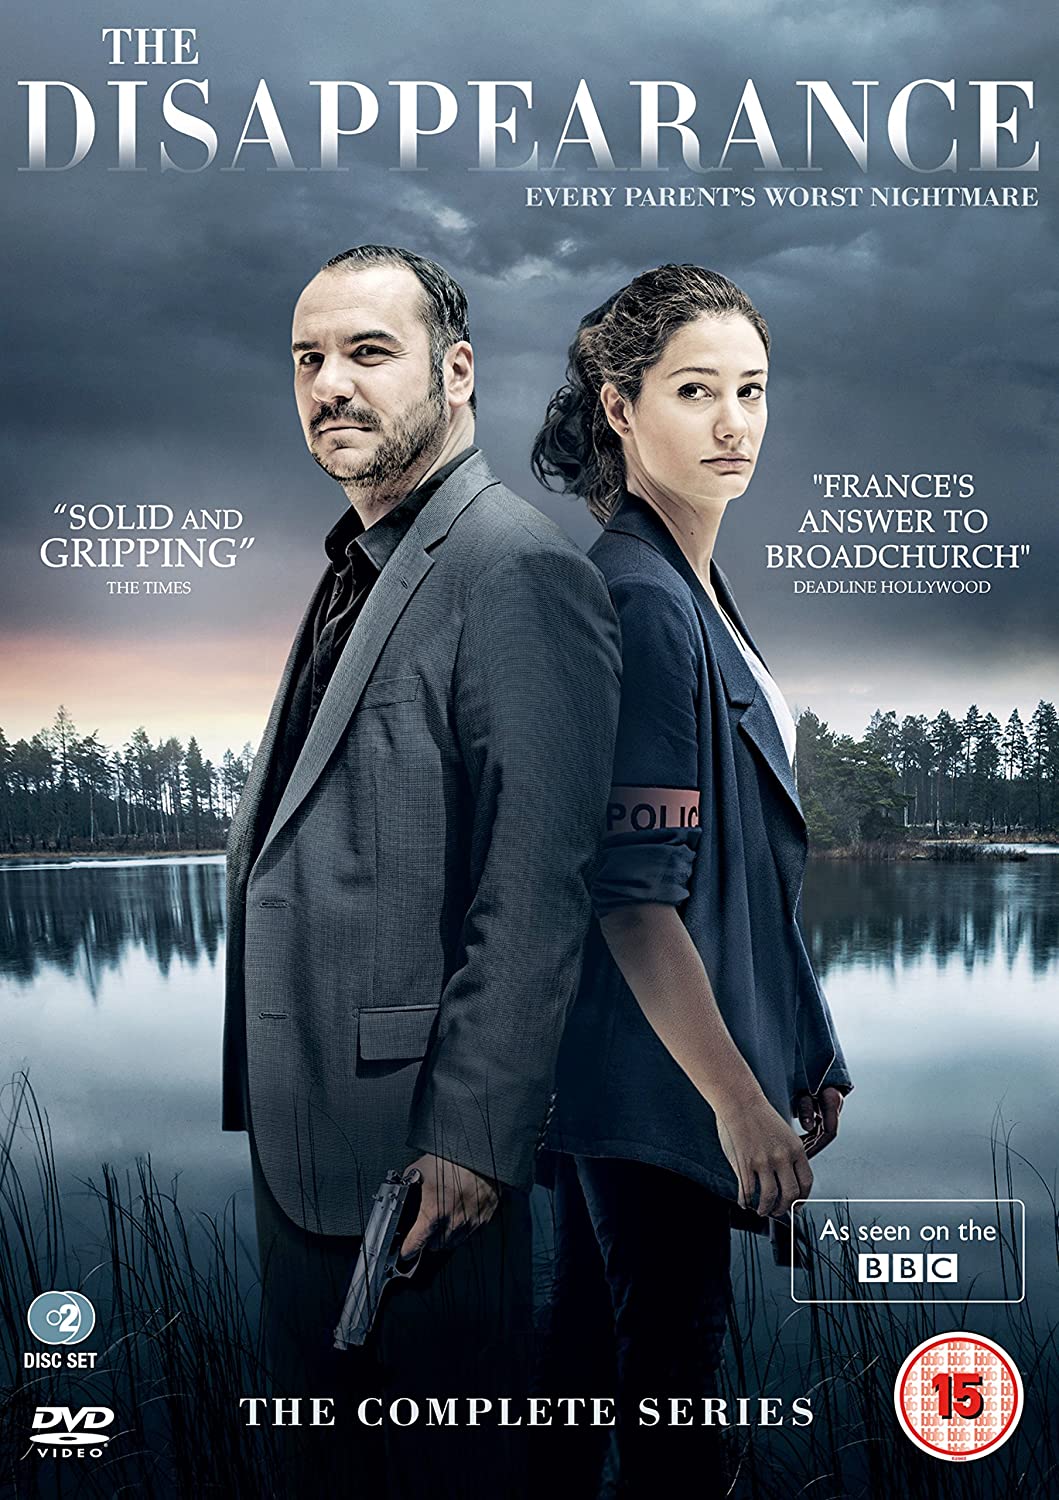 The Disappearance - Drama [DVD]